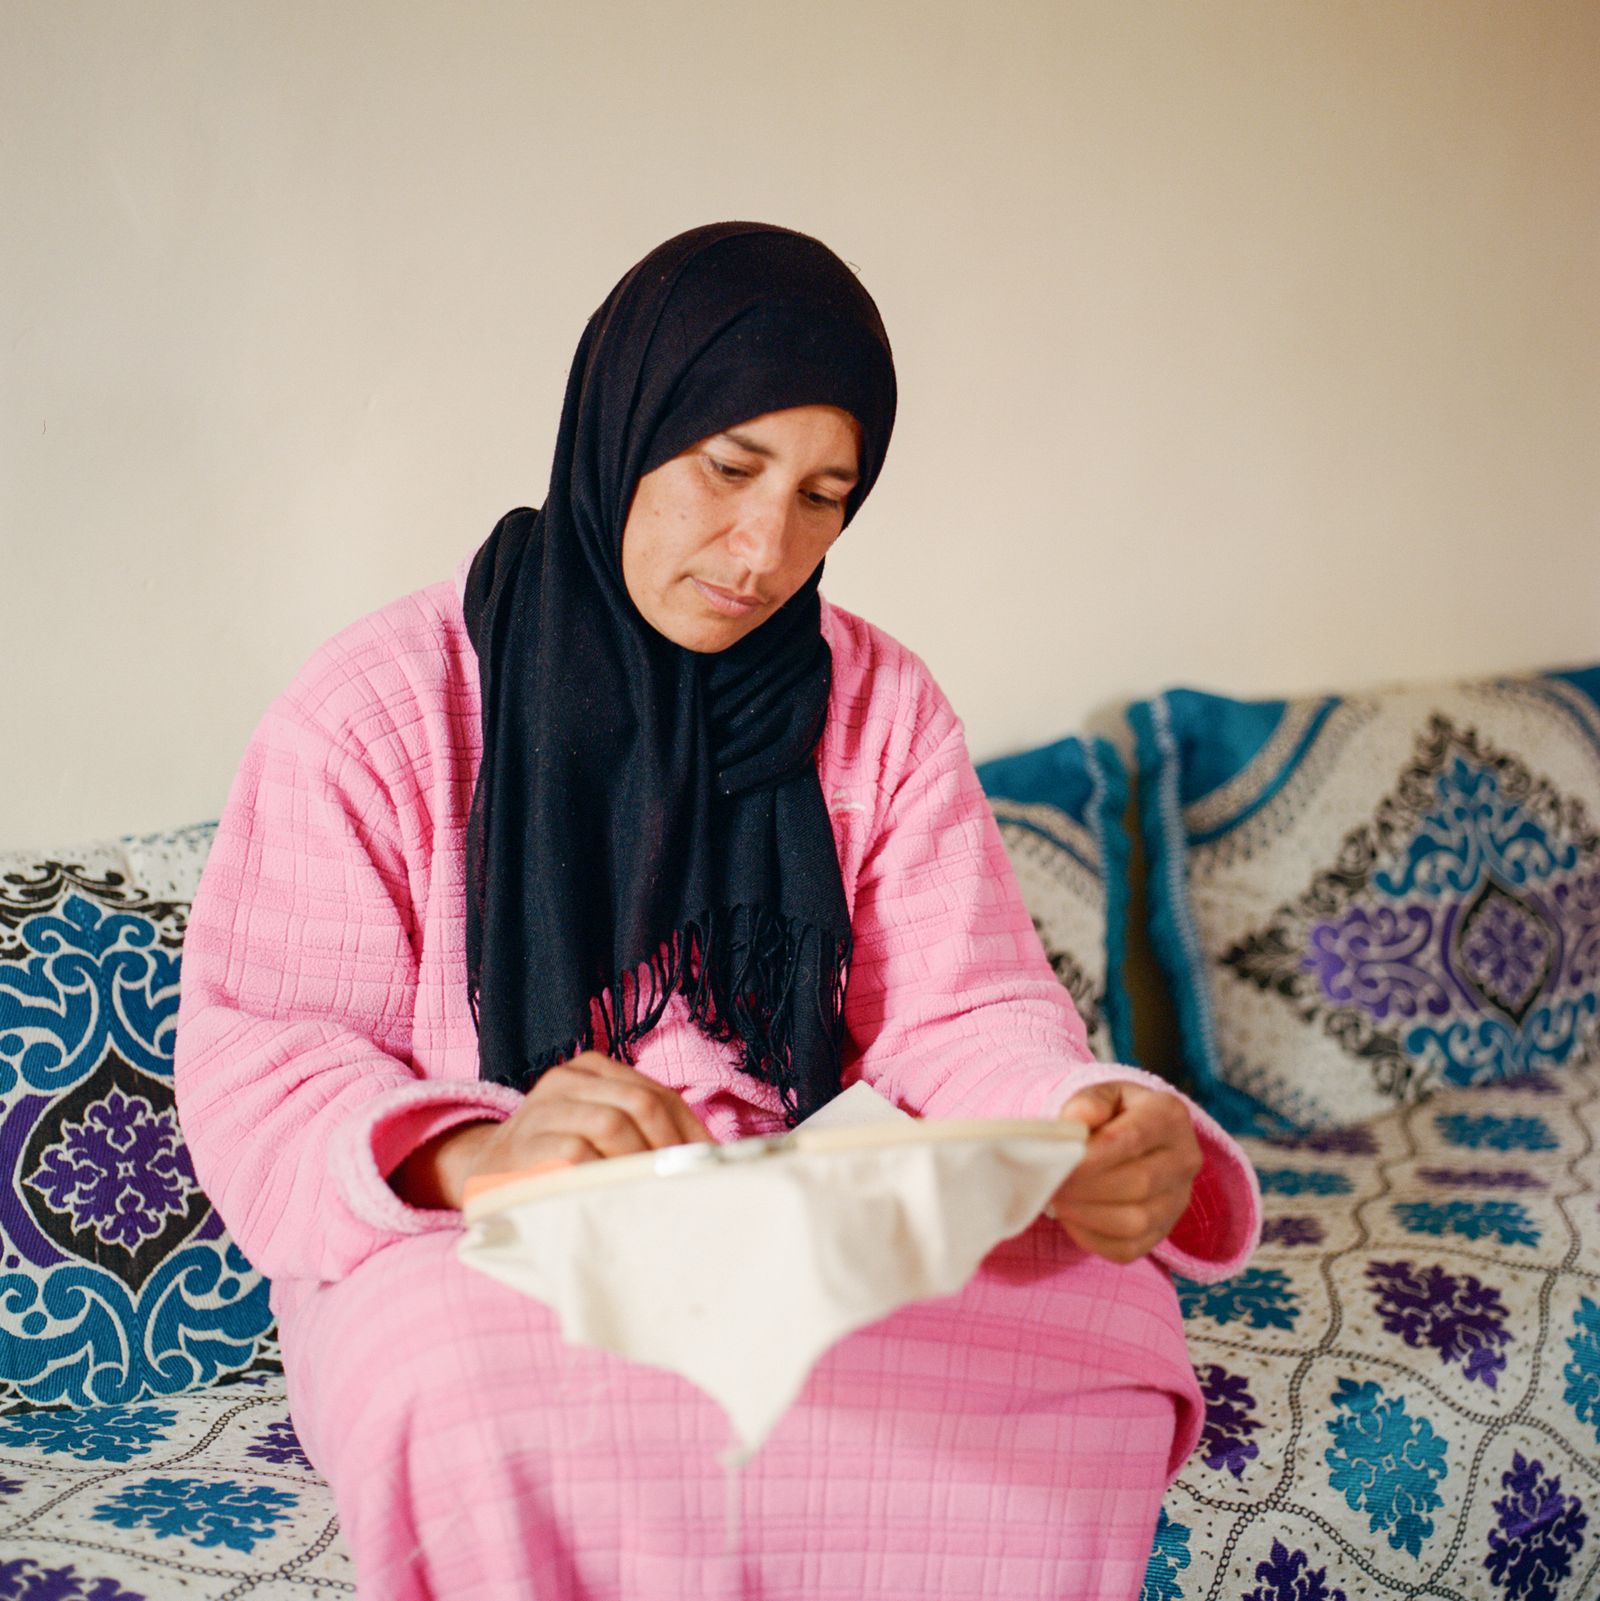 © M'hammed Kilito - Zakia sewing peacefully at home in the oasis of Skoura